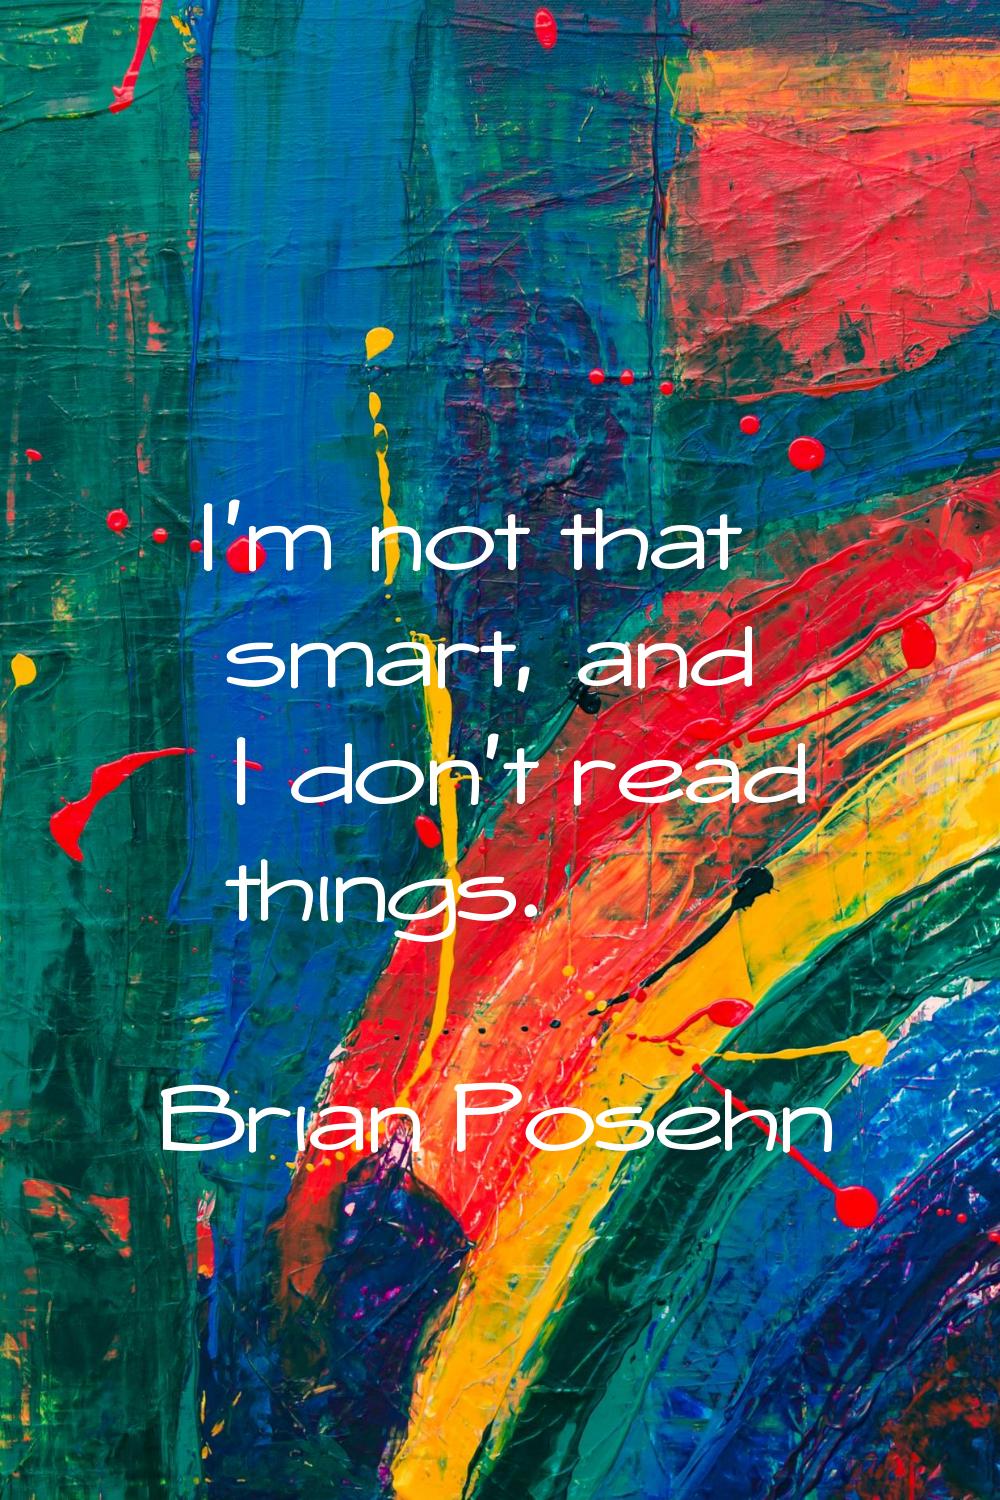 I'm not that smart, and I don't read things.